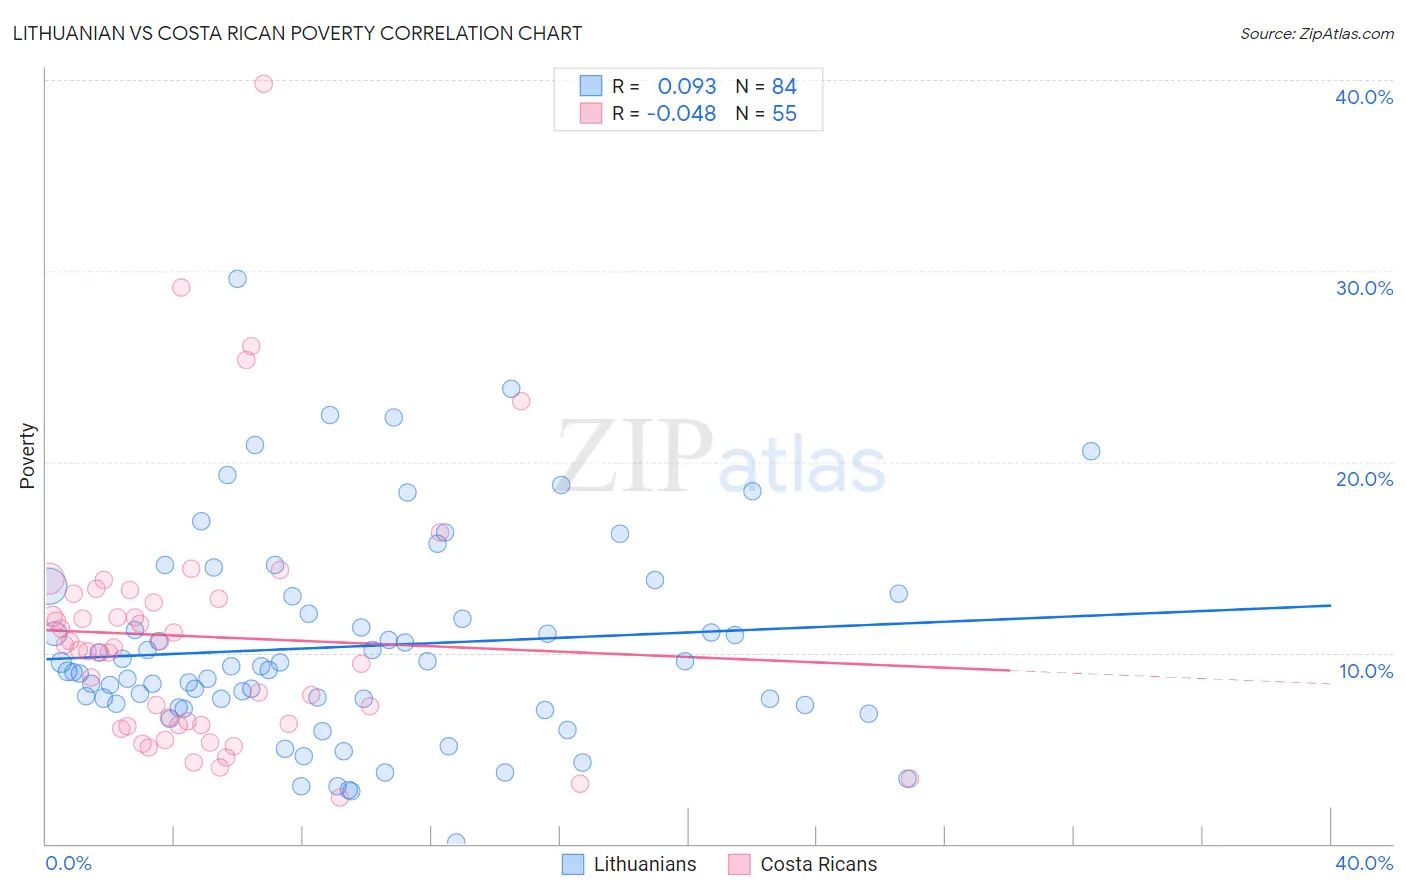 Lithuanian vs Costa Rican Poverty